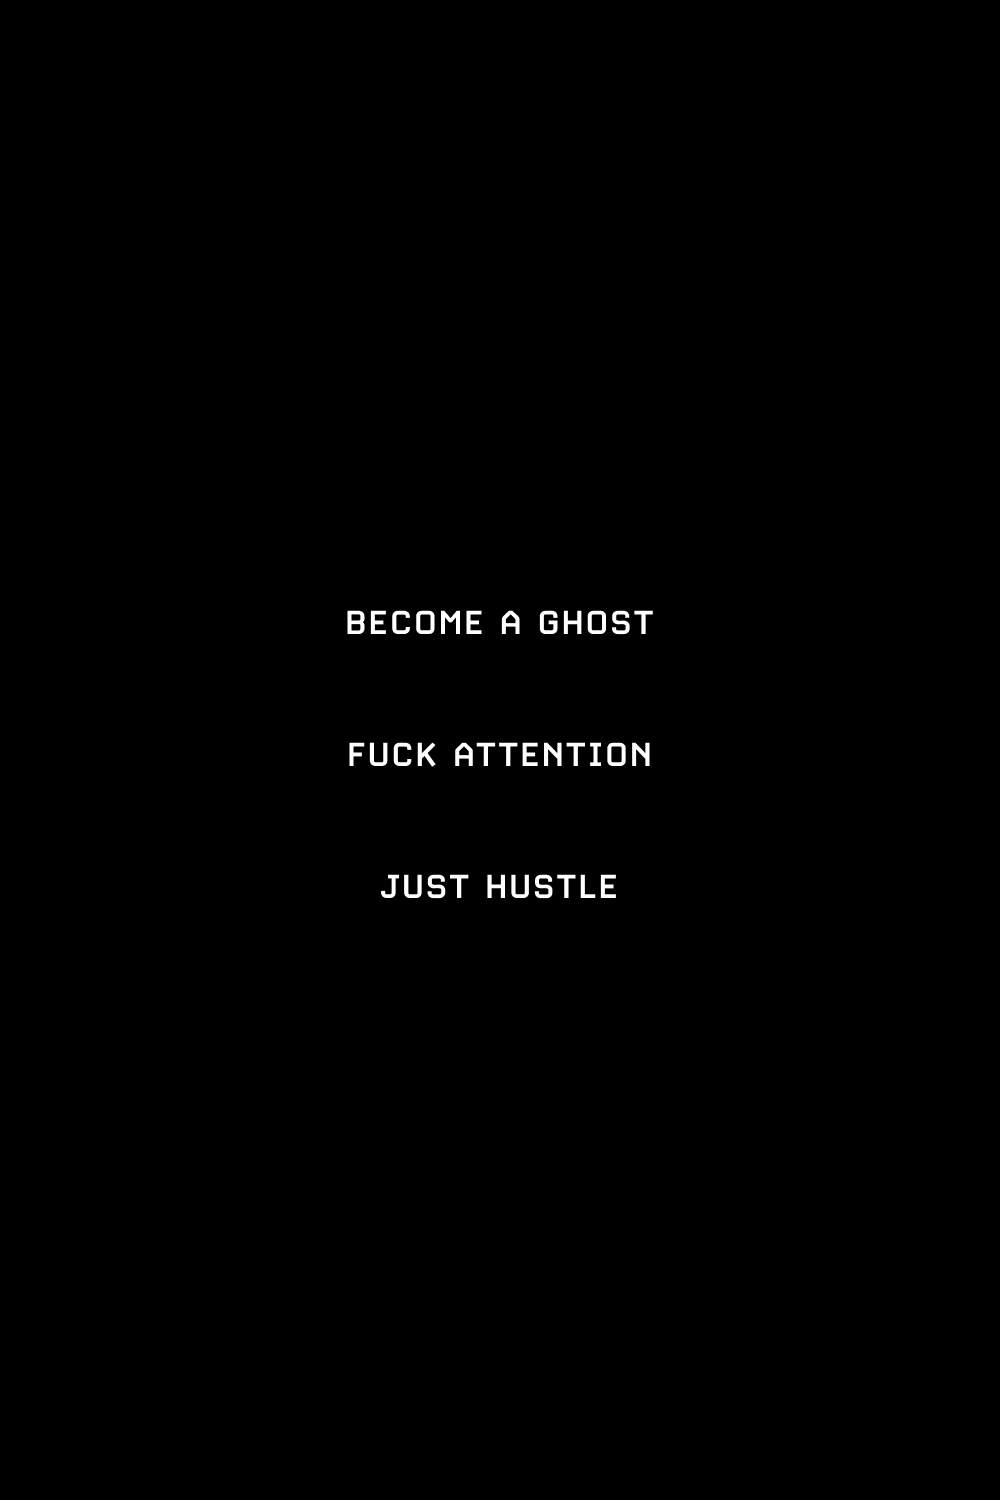 Quotes. Wisdom. Attention. Hustle. Success. People. Motivation. Inspiration. Hustle quotes motivation, Motivational quotes, Inspirational quotes motivation